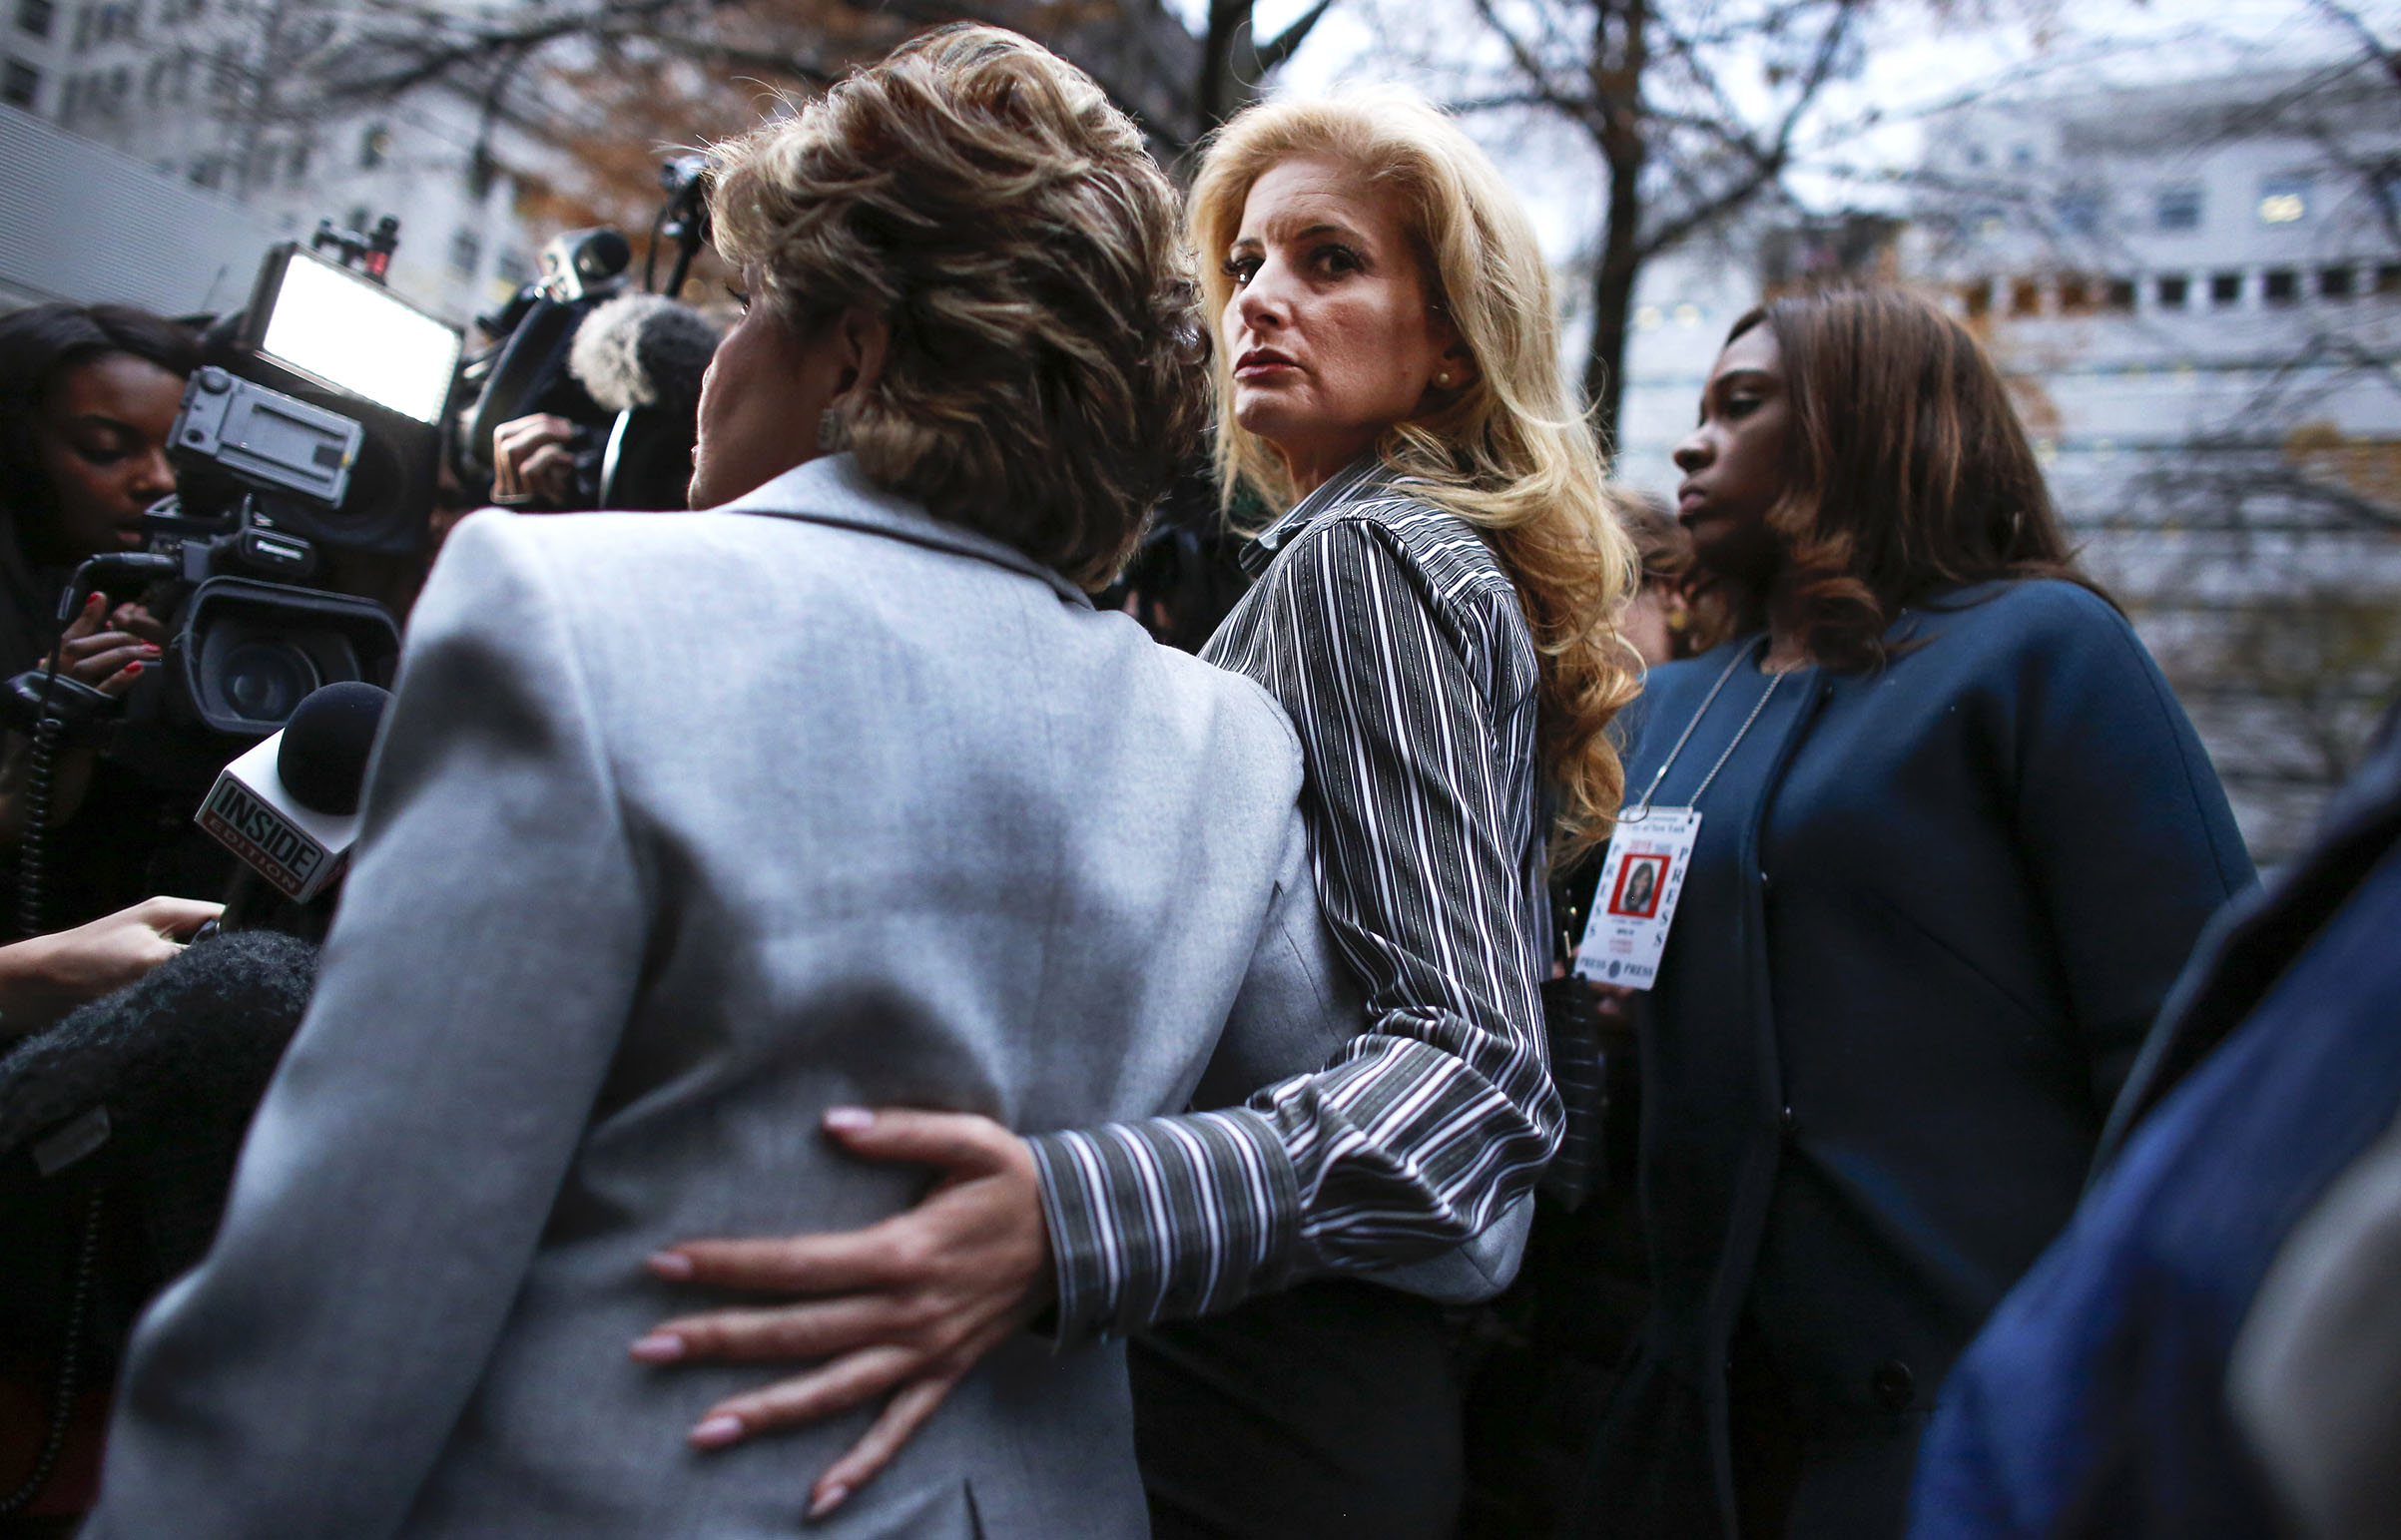 Summer Zervos a former contestant on "The Apprentice" looks at the camera as she embraces lawyer Gloria Allred after they leave the New York County Criminal Court on Dec. 5, 2017. (Kena Betancur—AFP/Getty Images)